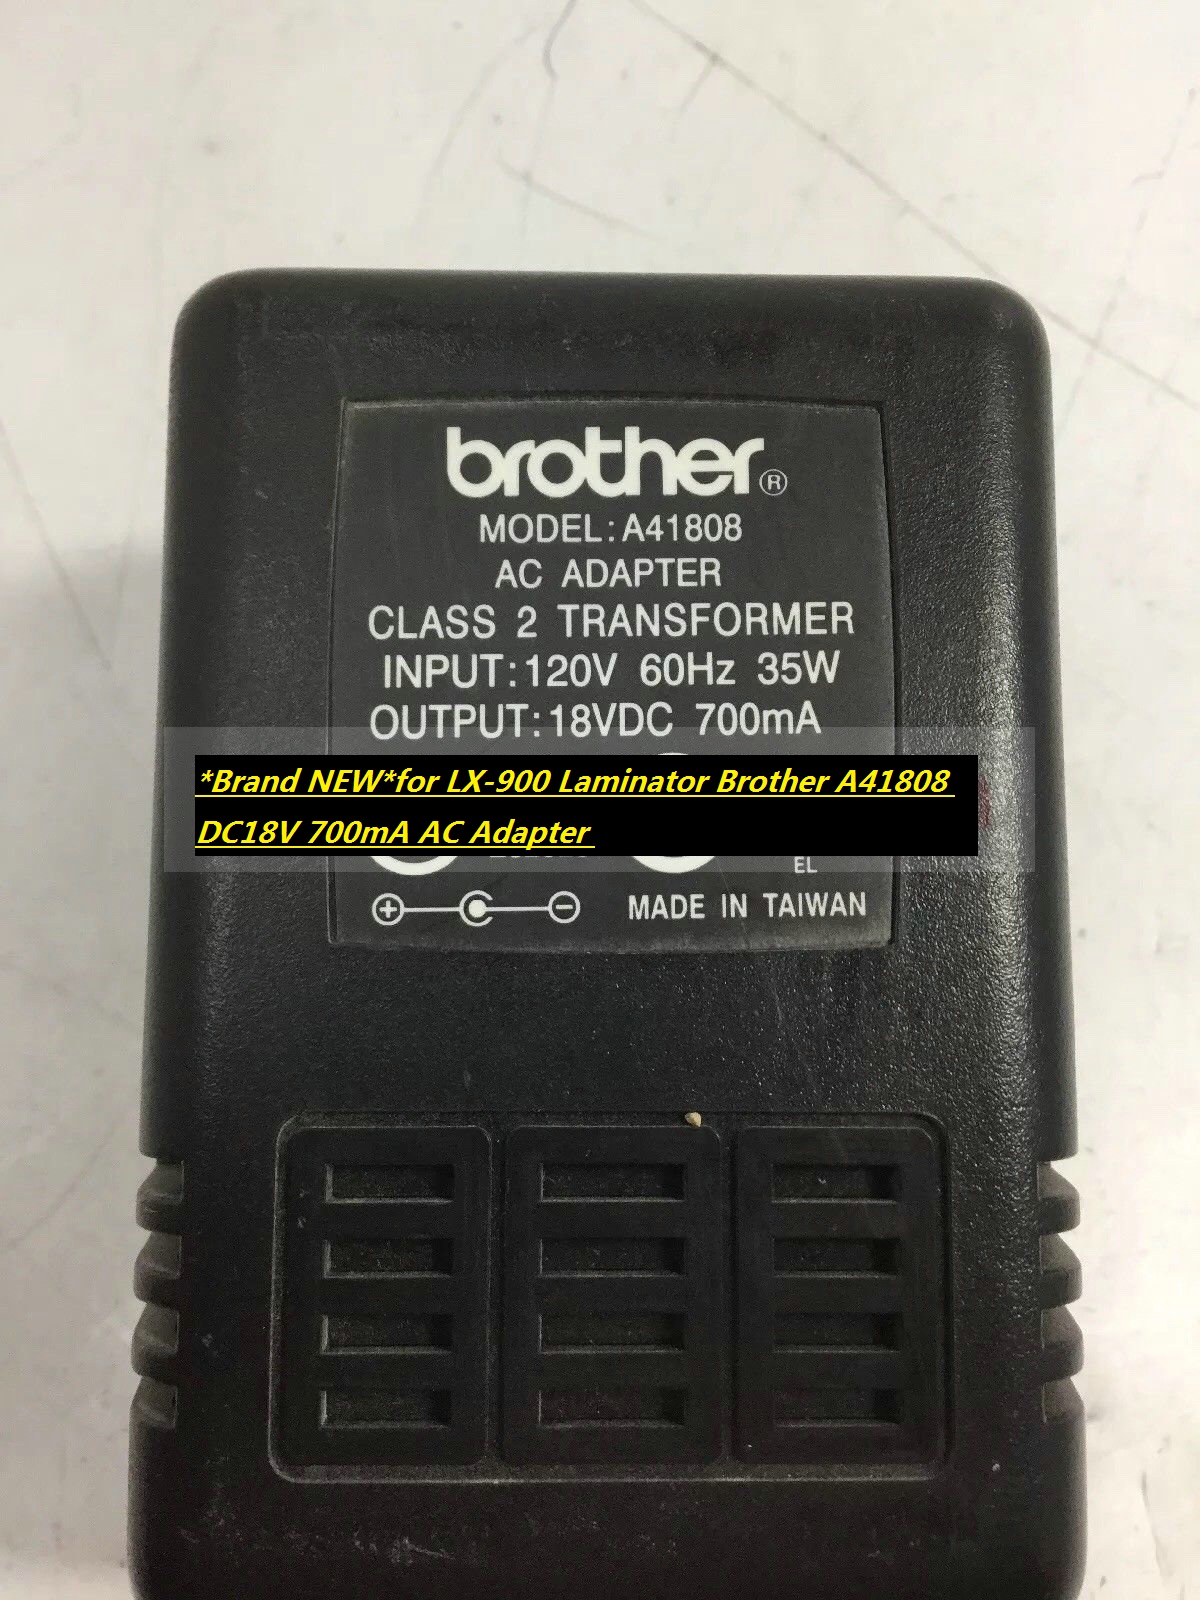 *Brand NEW*for LX-900 Laminator Brother A41808 DC18V 700mA AC Adapter